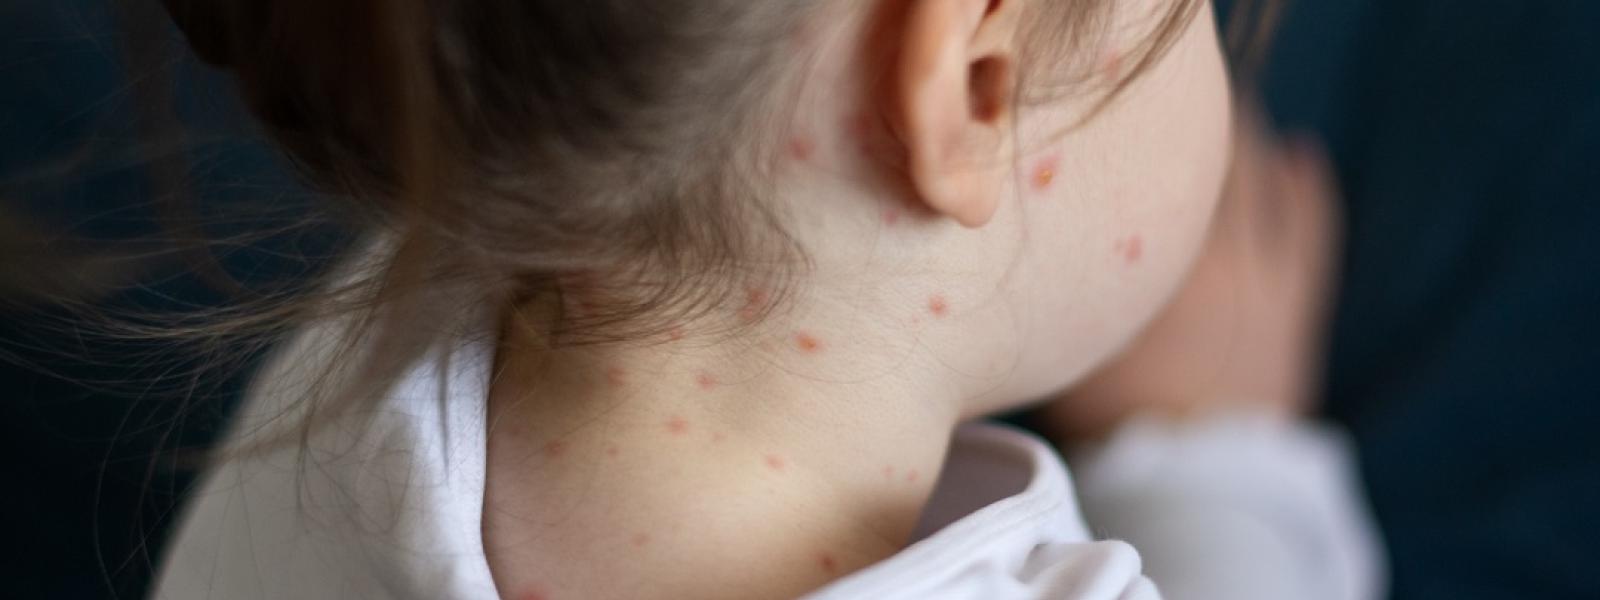 Small Girl With Chickenpox Measles on Her Body